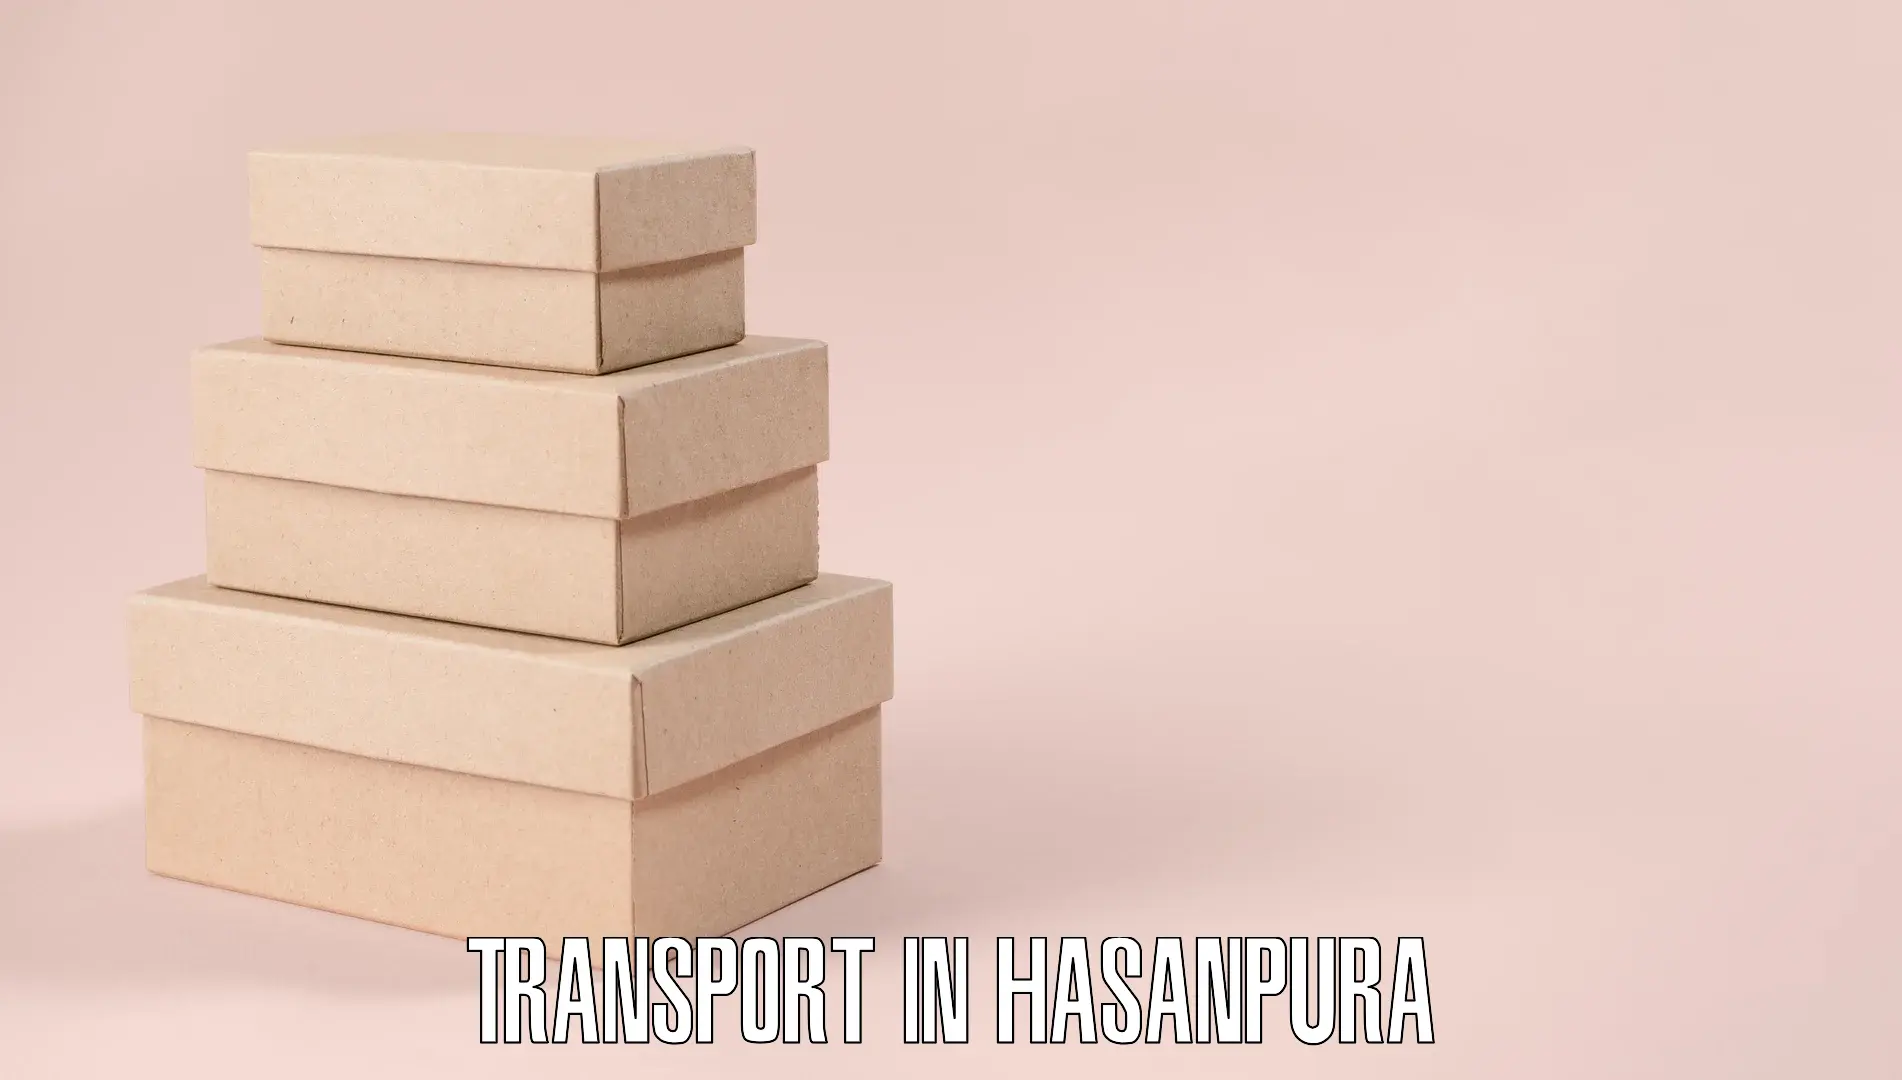 Container transport service in Hasanpura